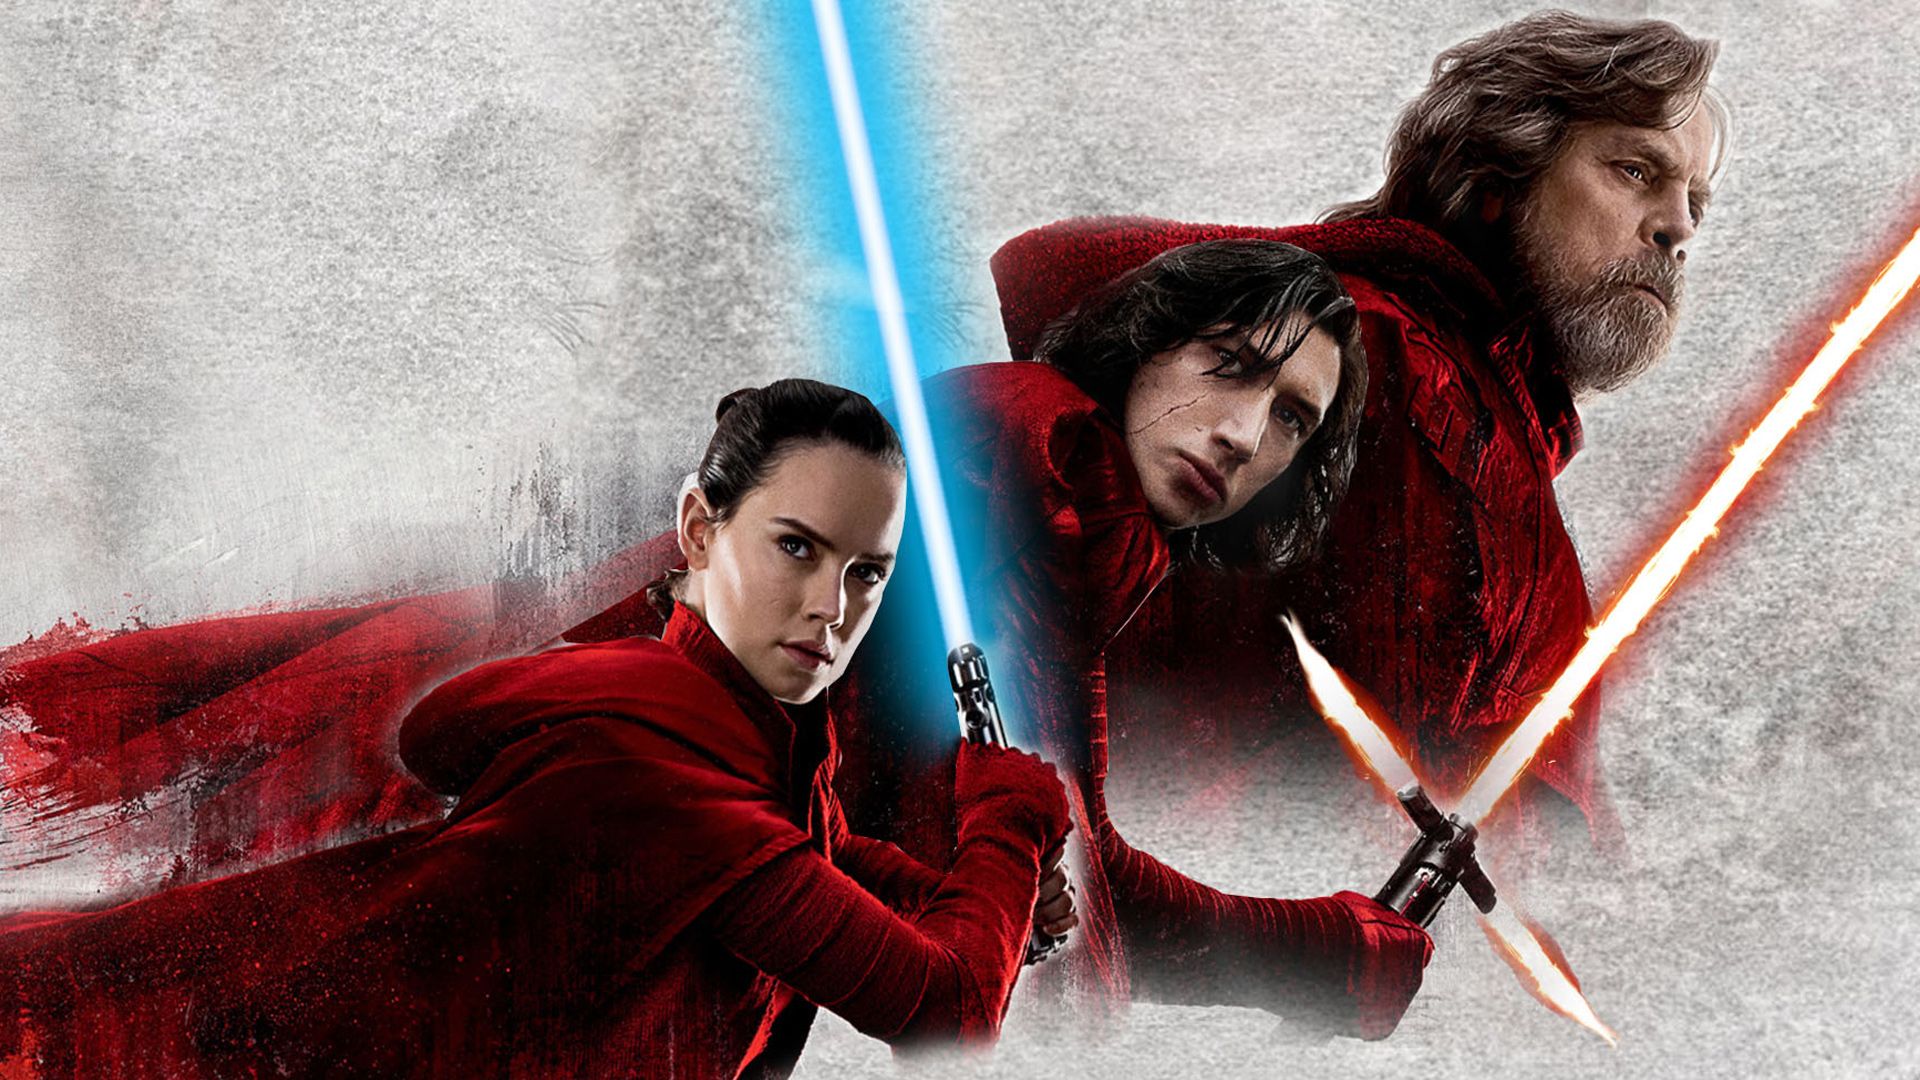 Star Wars: The Last Jedi' Is Just the Beginning for Rian Johnson